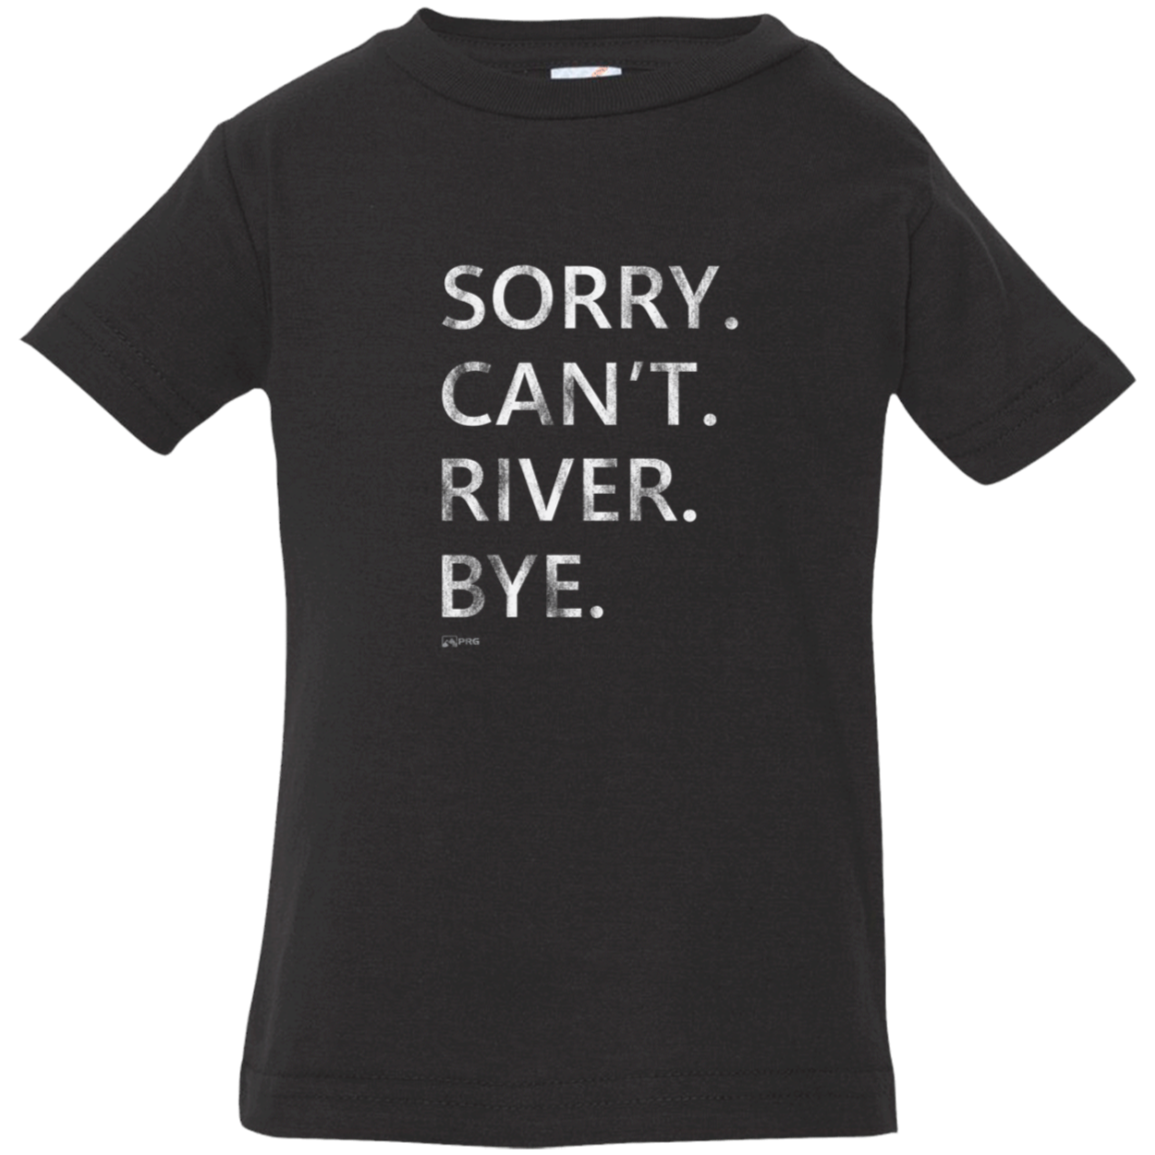 Sorry. Can't. River. Bye. - Infant Shirt